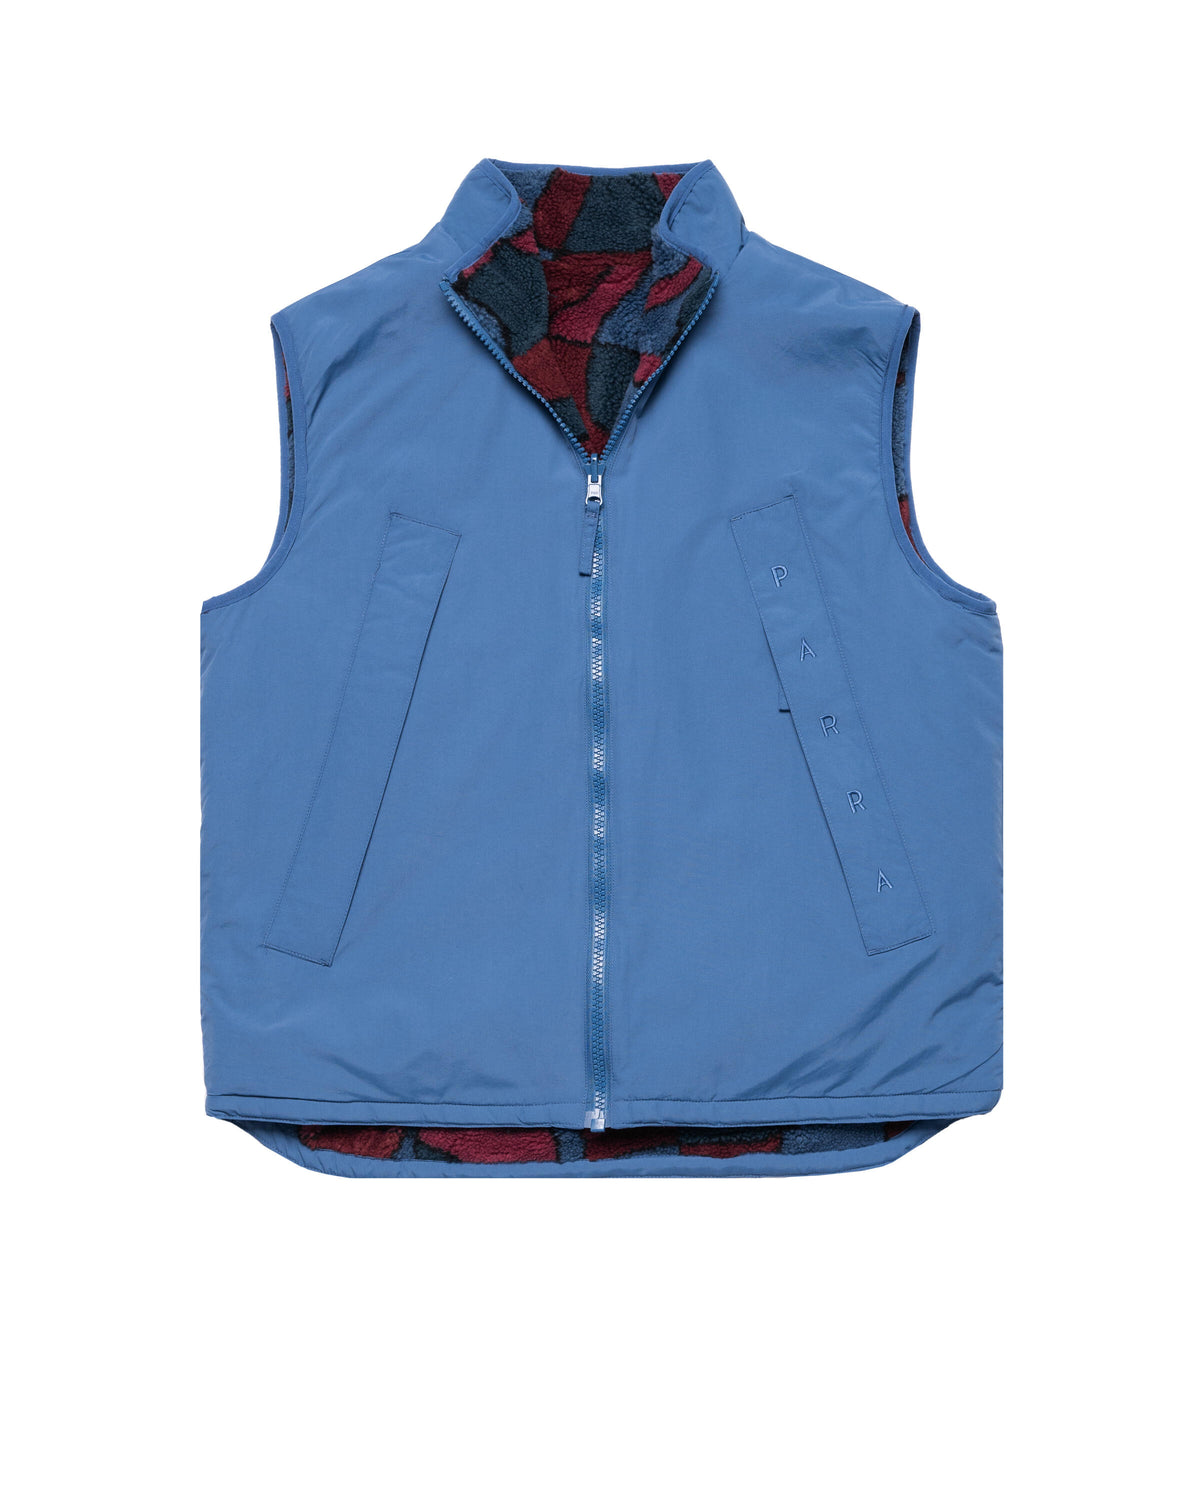 by Parra trees in wind reversible vest